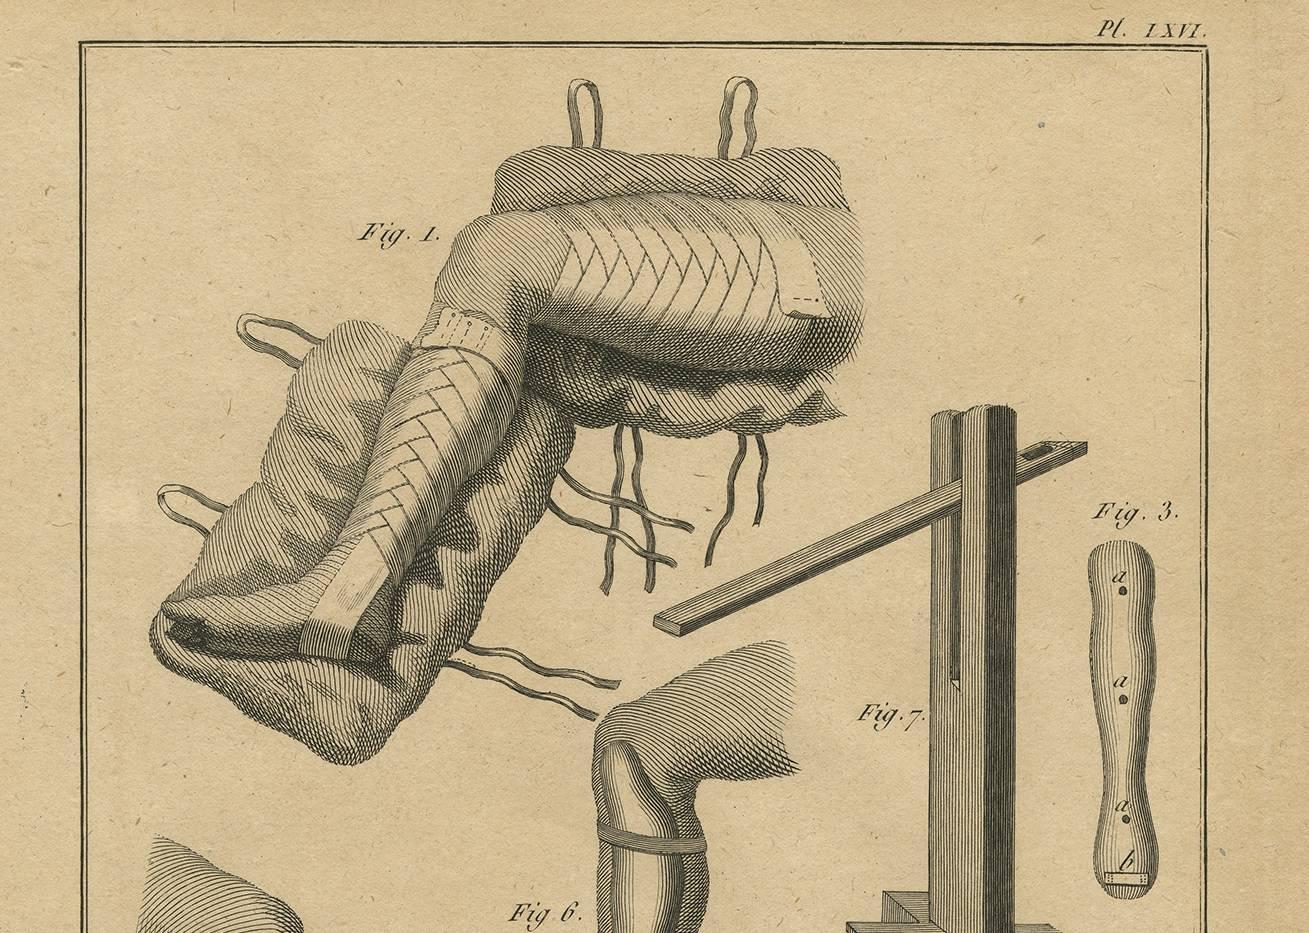 Chirurgie plate LXVI, published in 'Recueil des planches du Dictionnaire de chirurgie' by H. Agasse, circa 1798. This book contains one-hundred thirteen extraordinary engravings detailing 18th century surgery techniques, various methods of caring